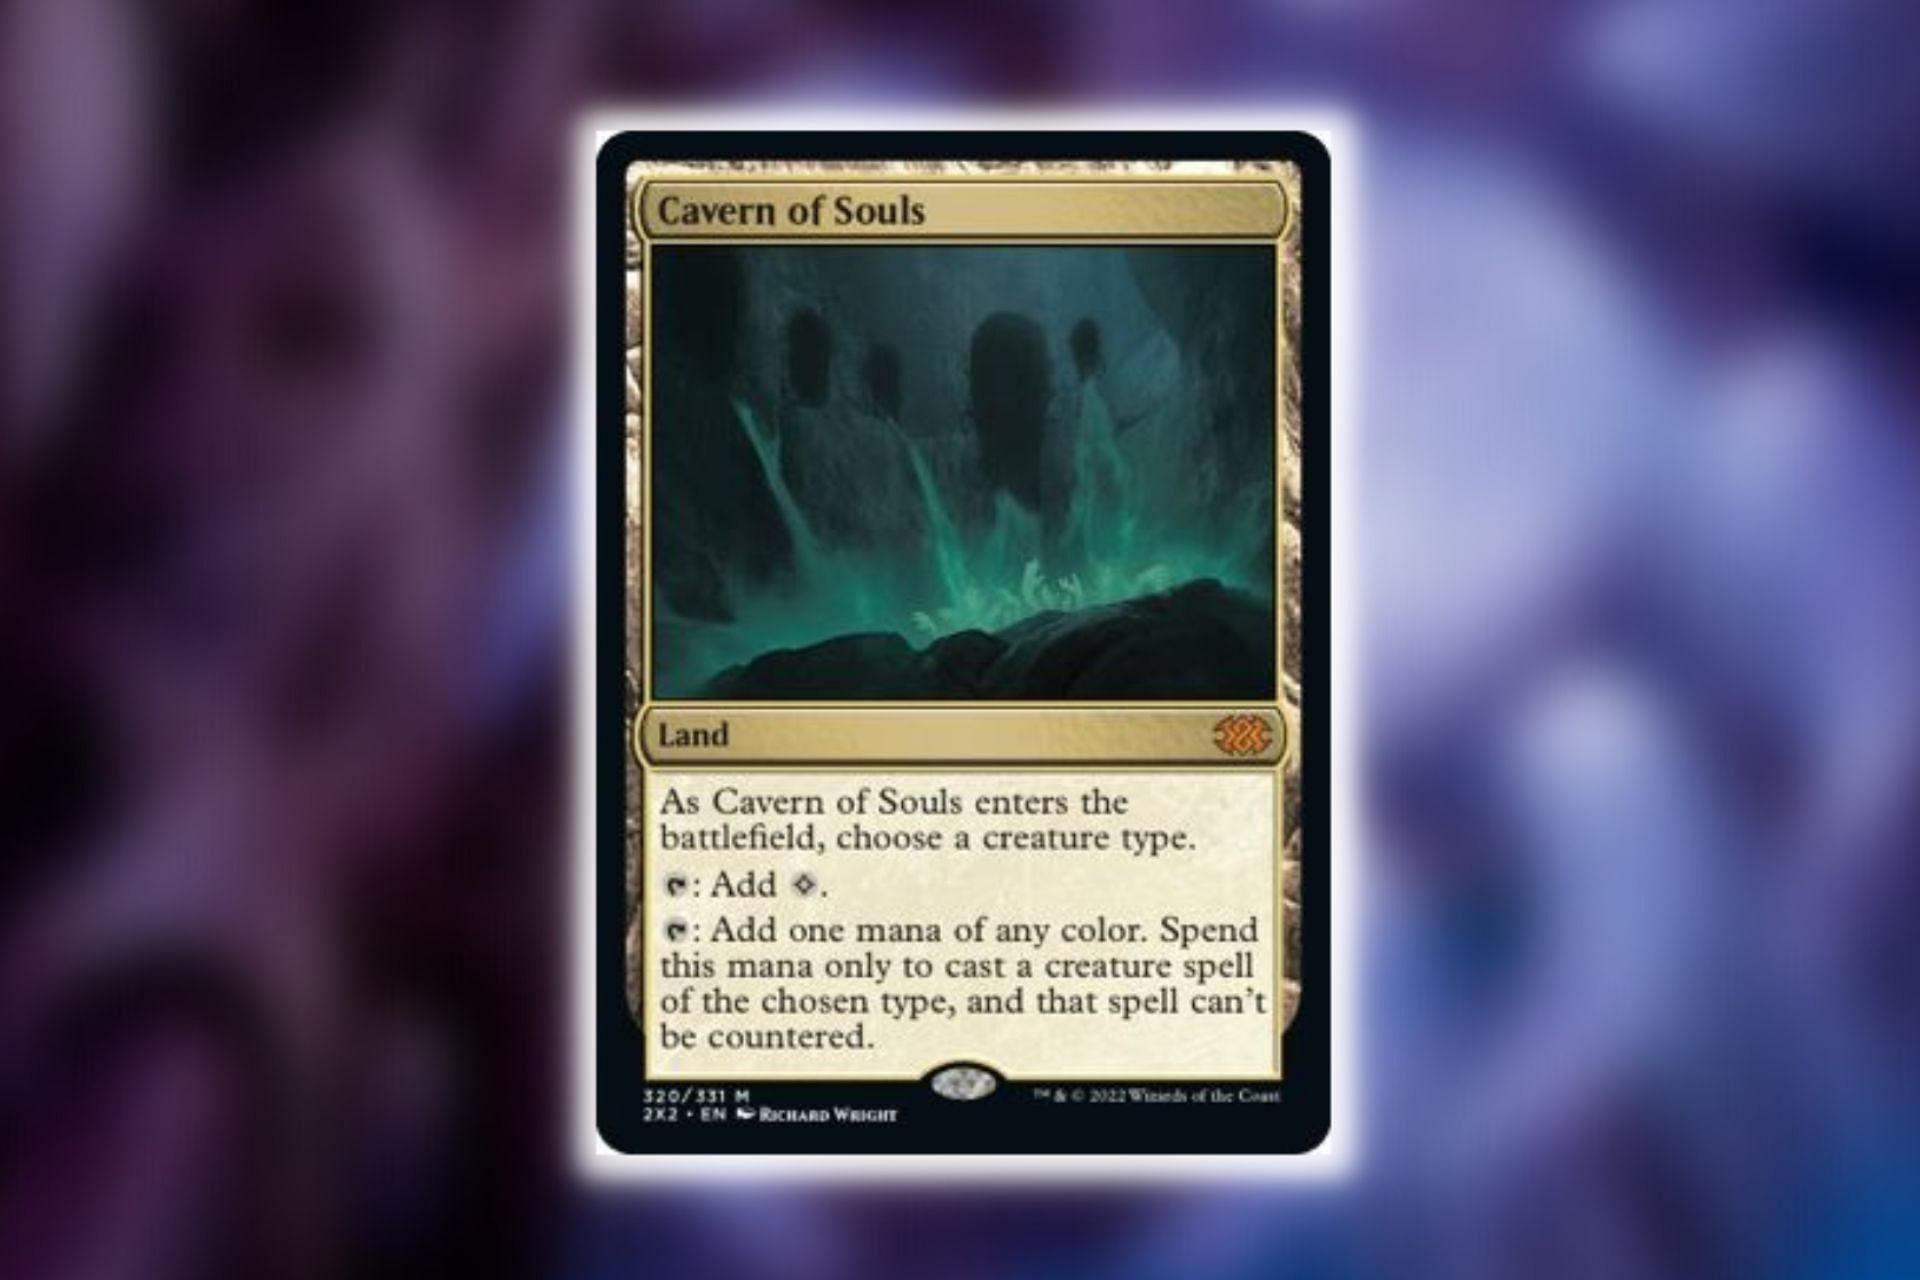 Cavern of Souls in Magic: The Gathering (Image via Wizards of the Coast)